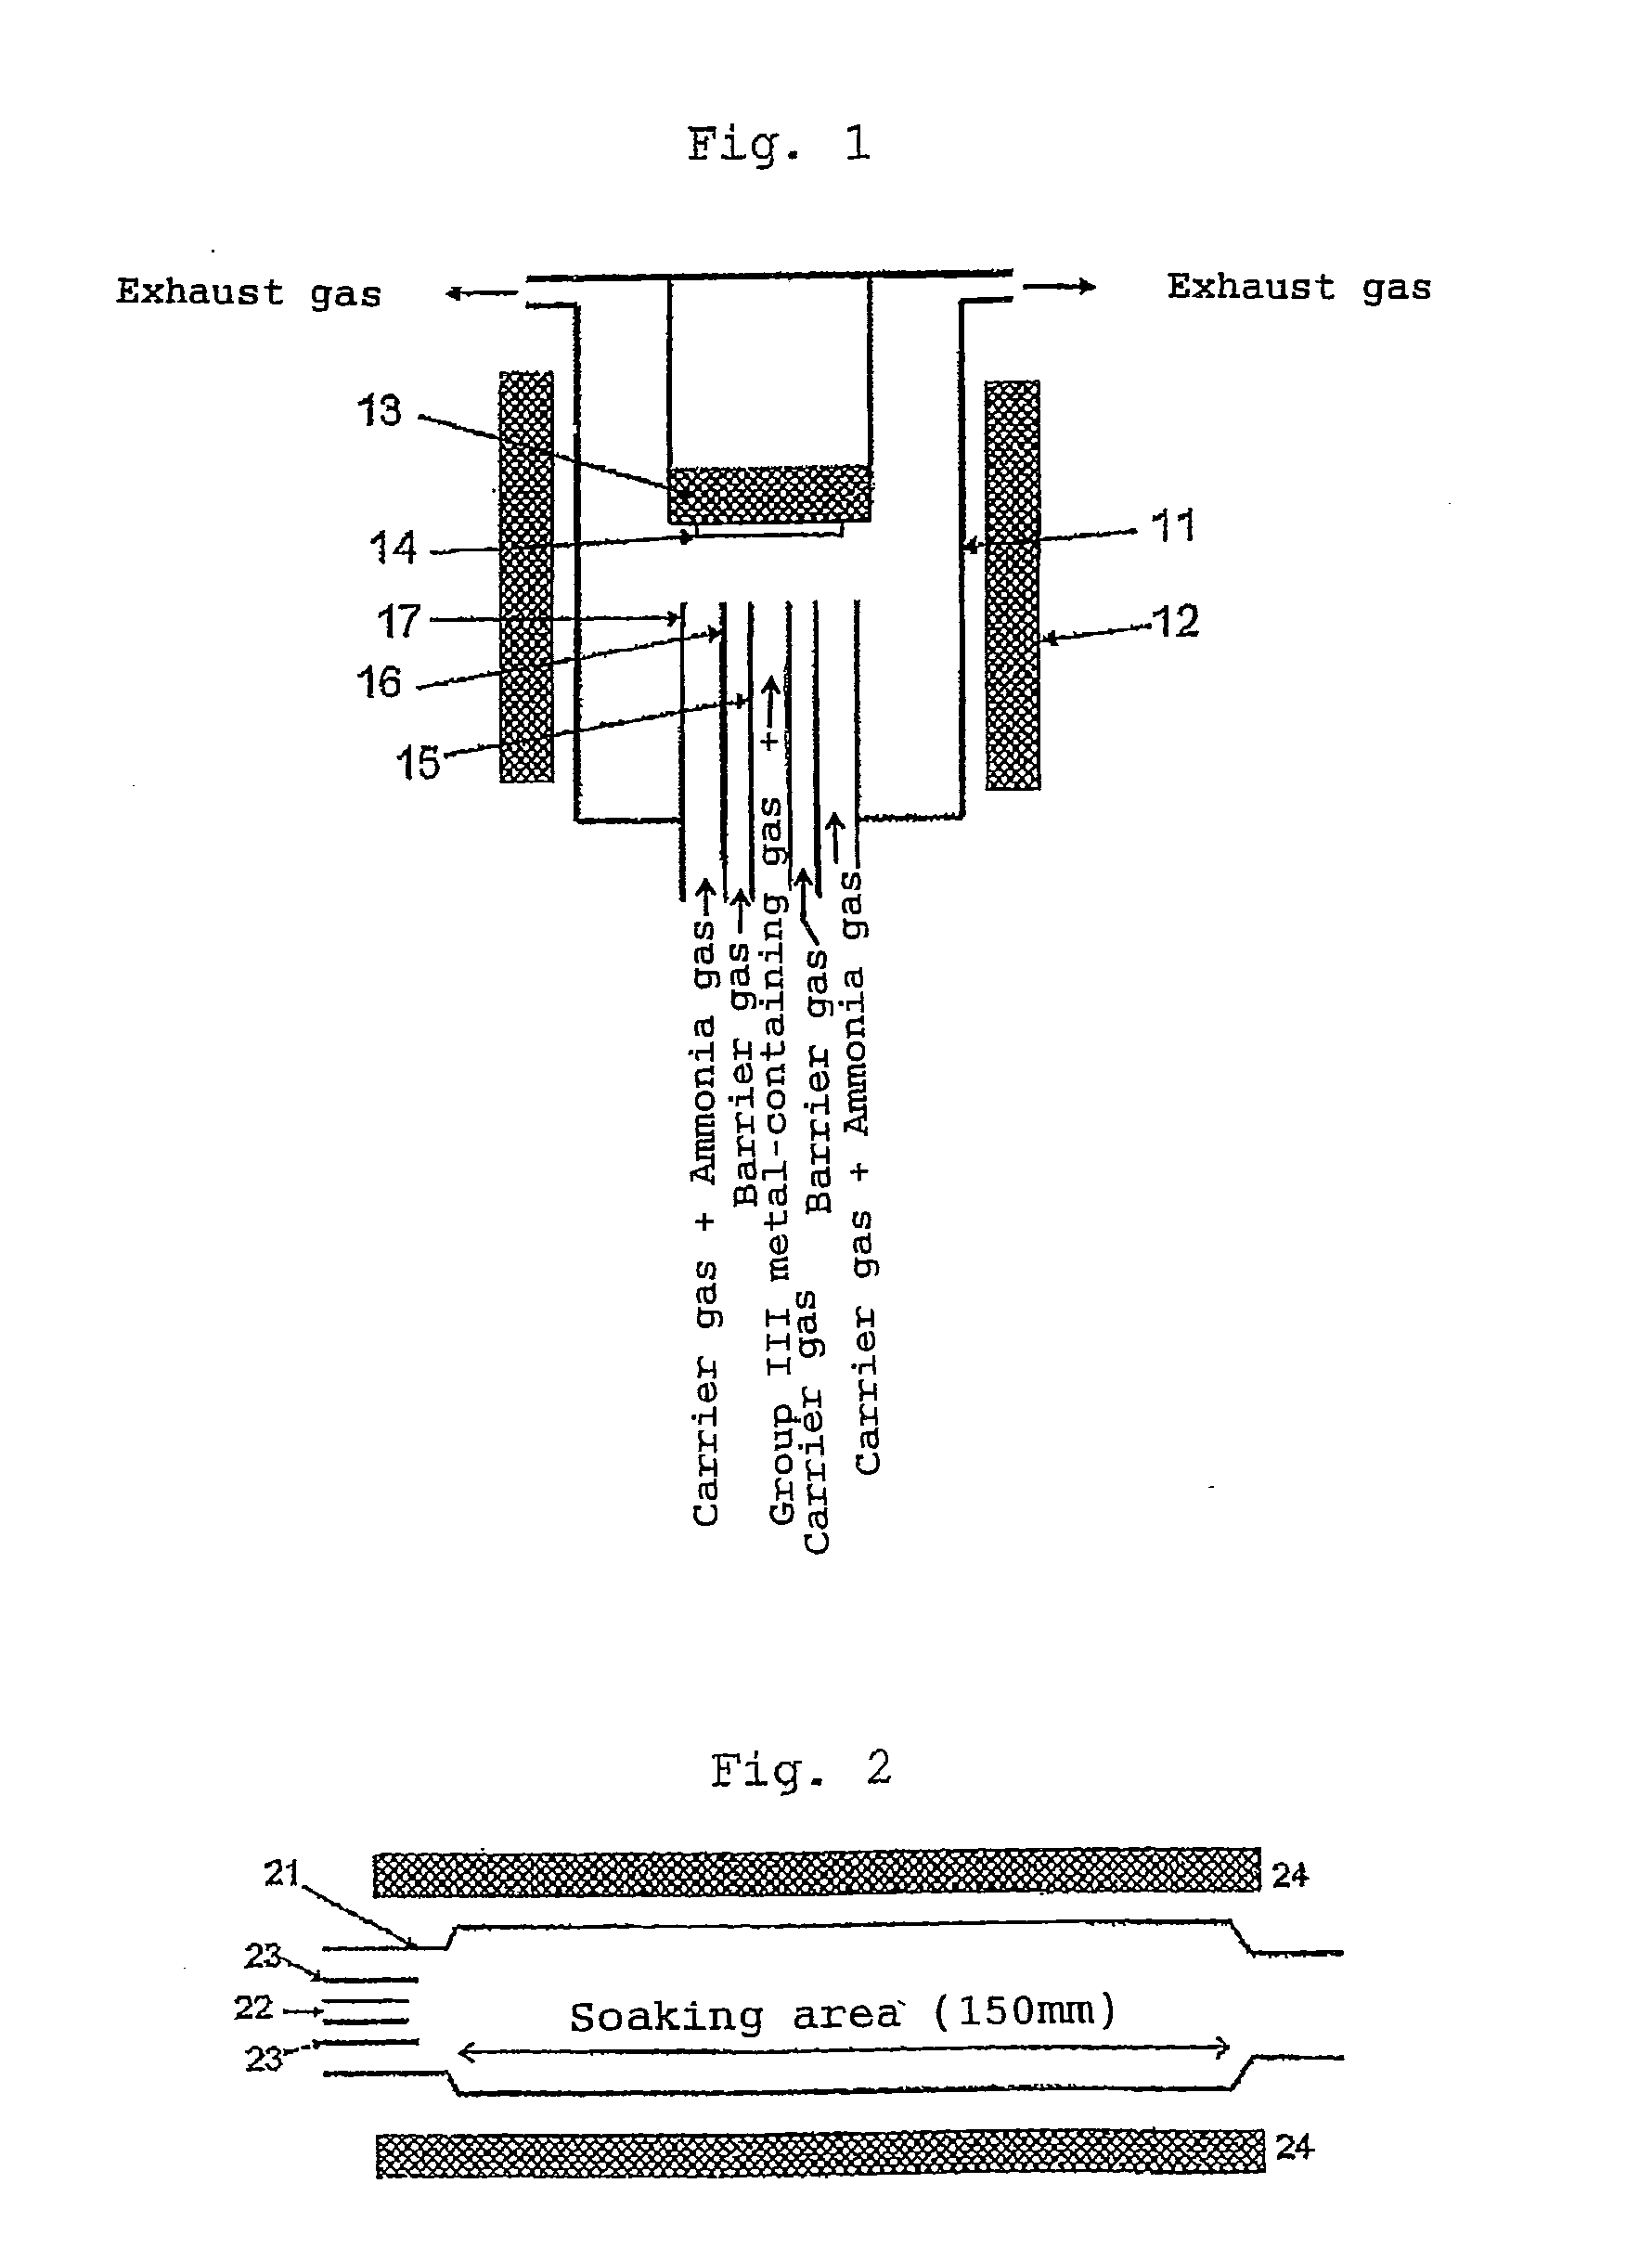 Method and apparatus for producing group iii nitride